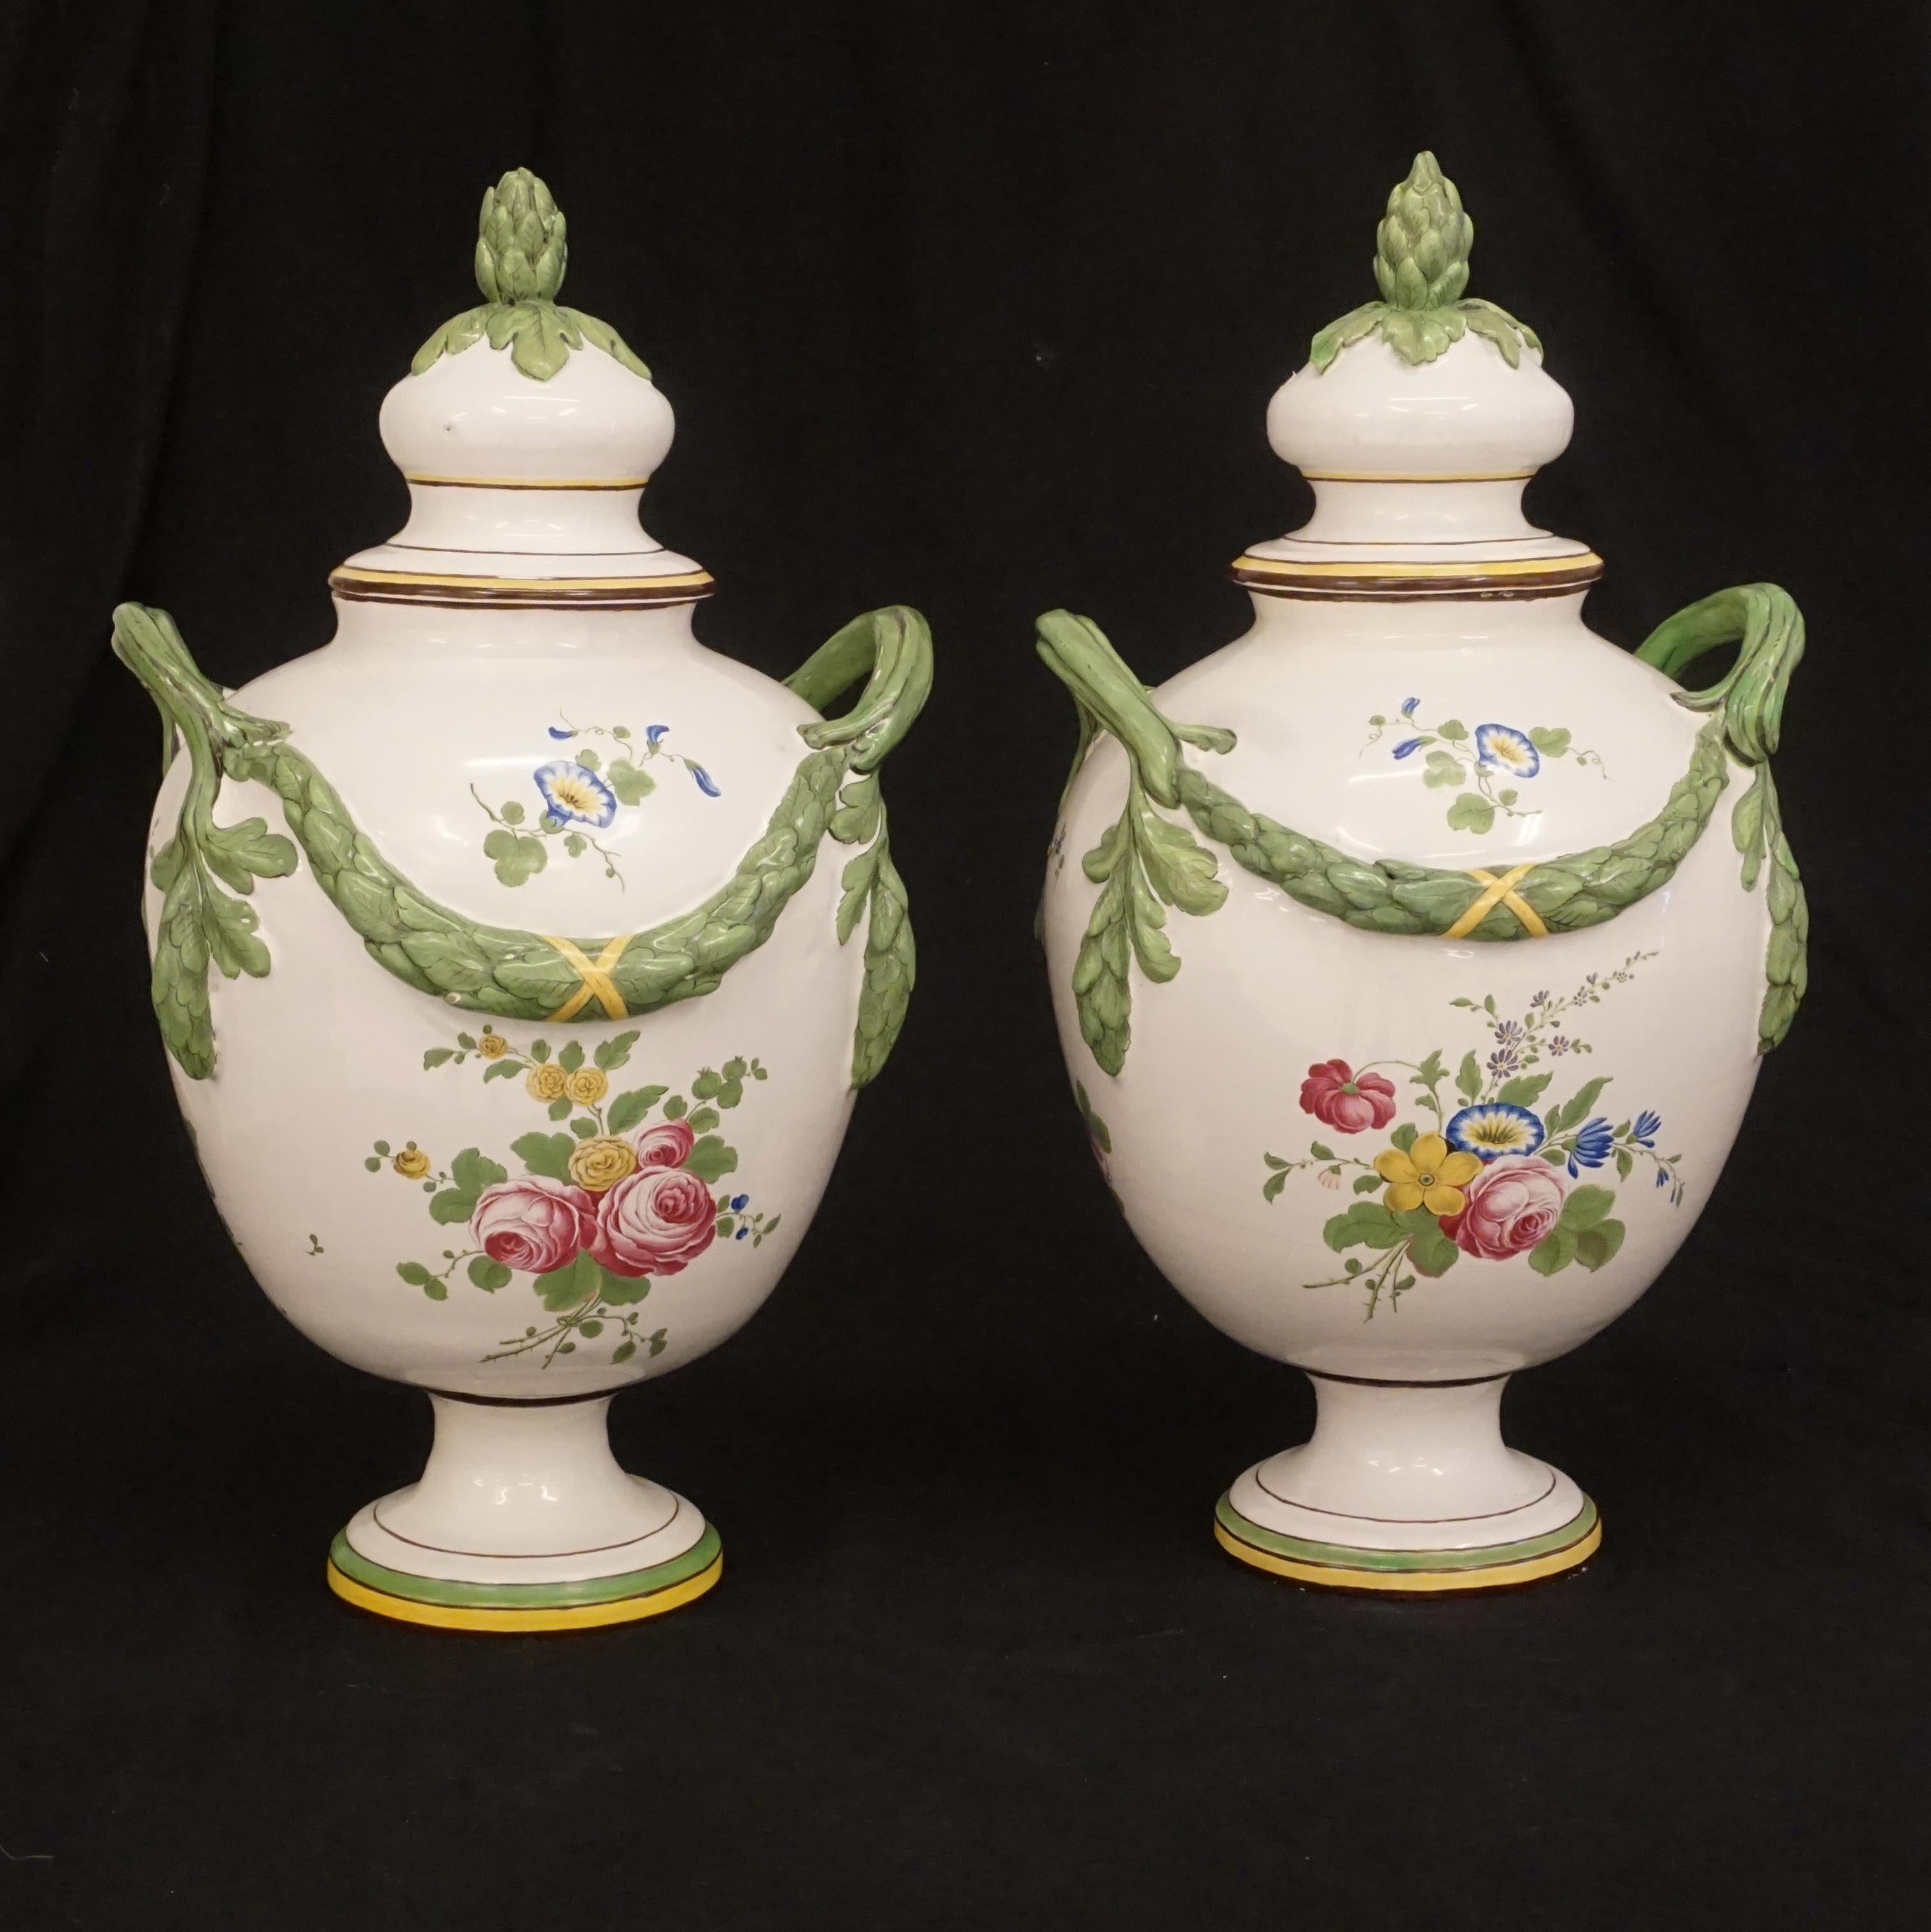 Pair of very rare signed Marieberg polychrome faience lidded vases
Signed circa 1765.